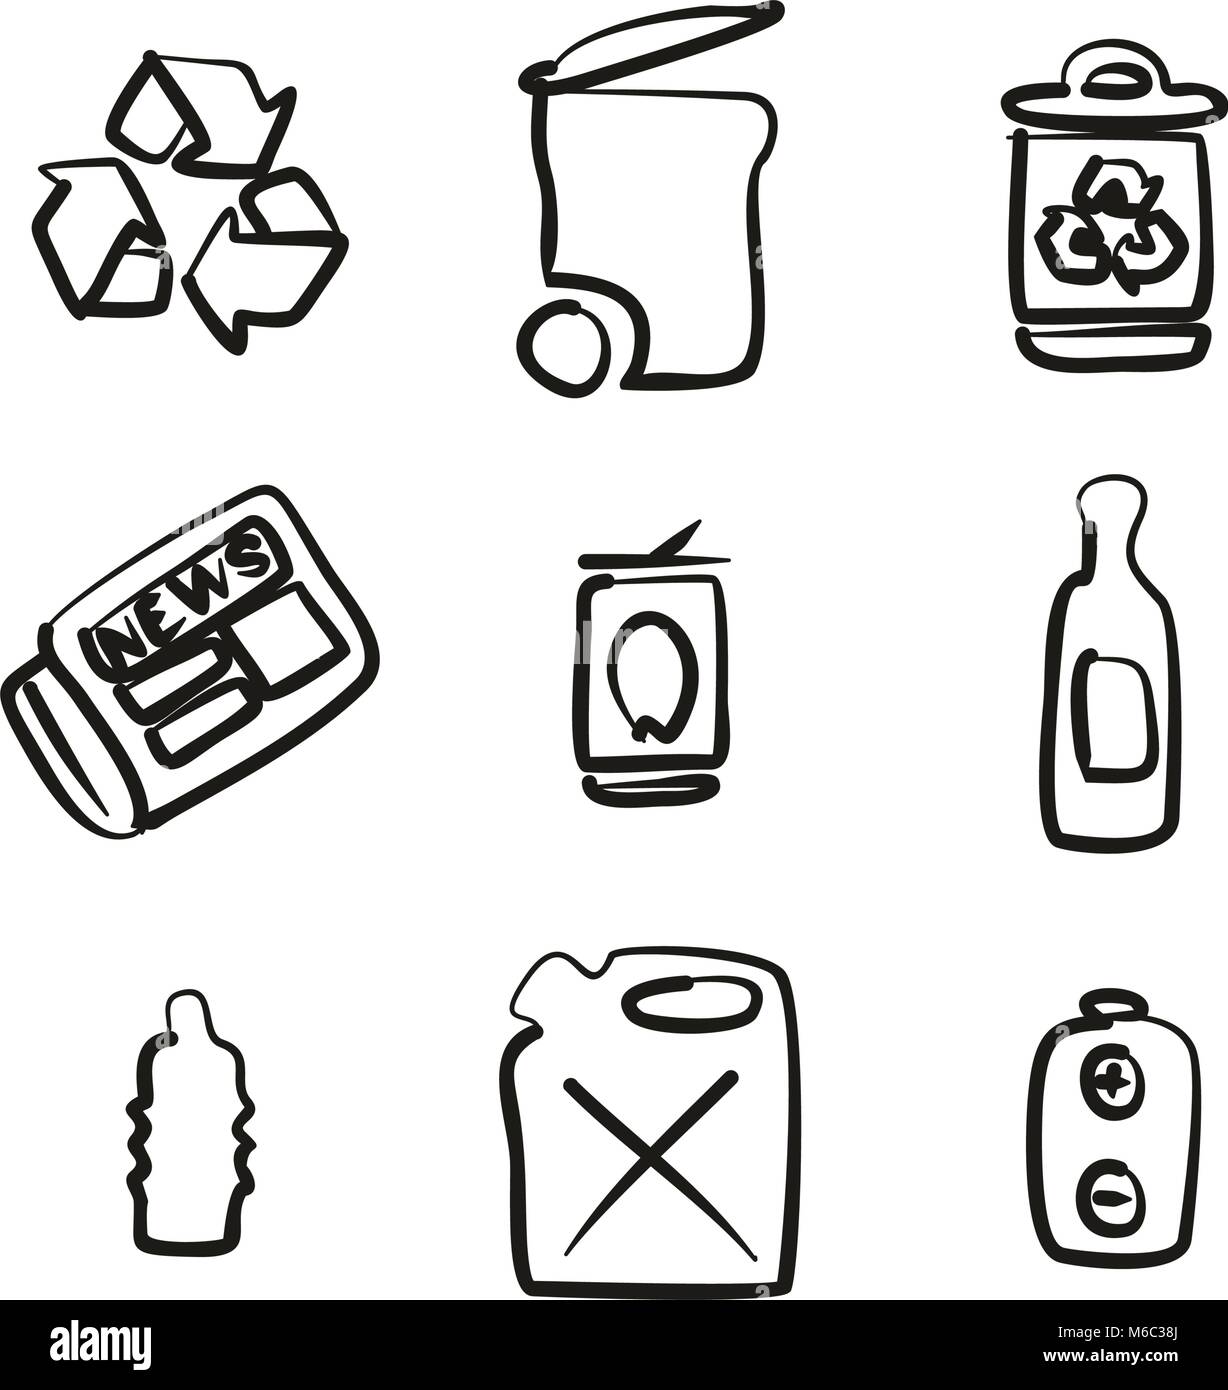 Recycling Icons Freehand Stock Vector